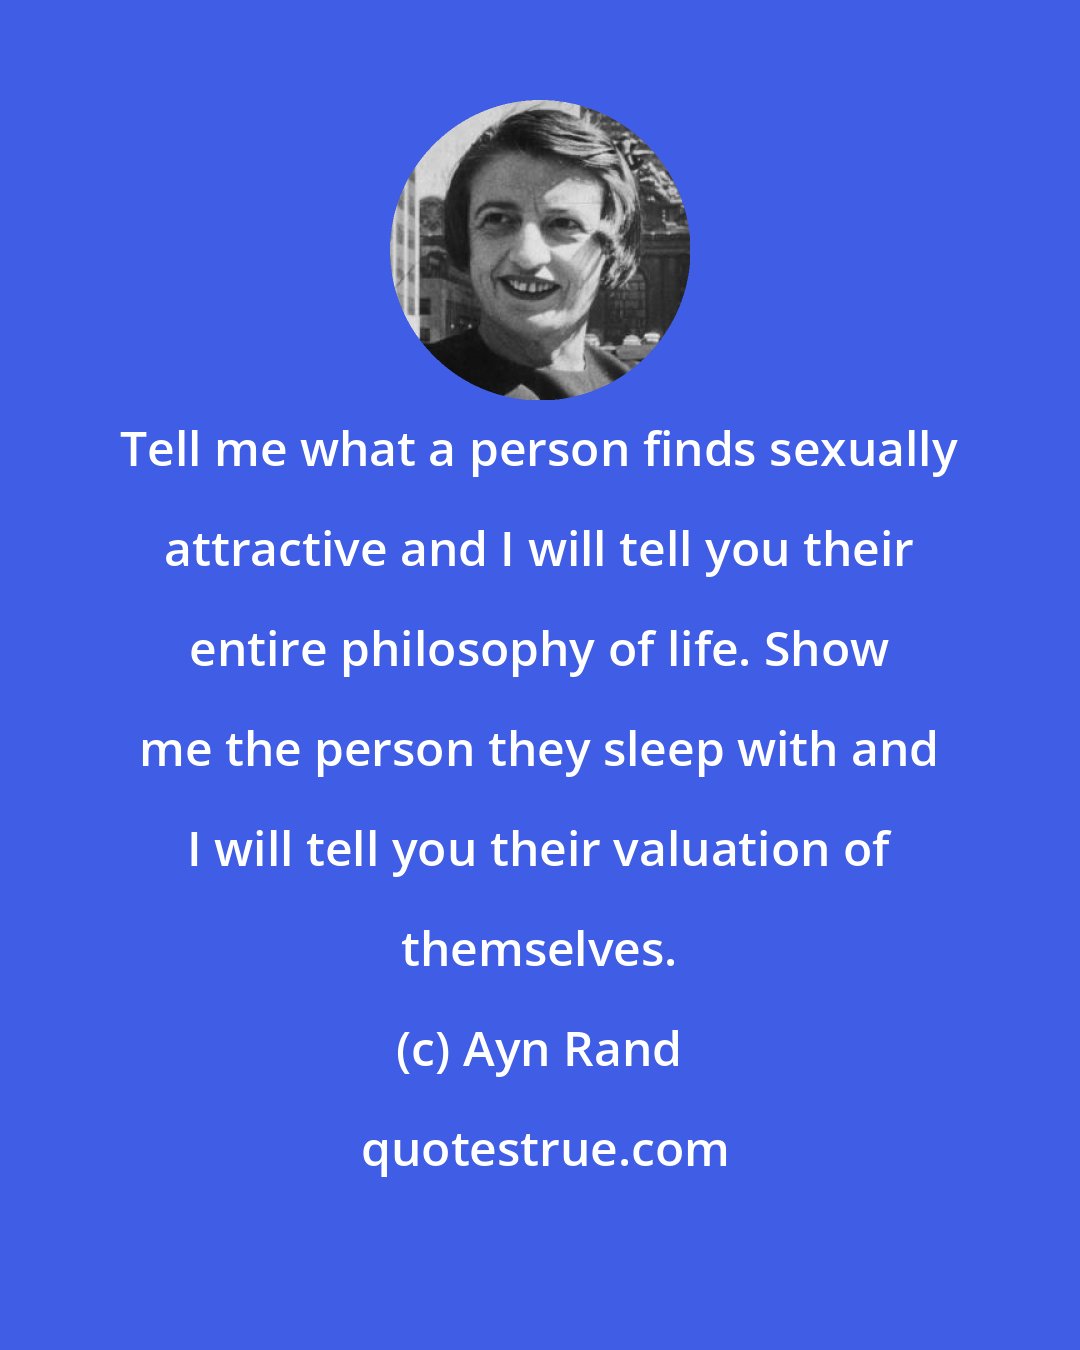 Ayn Rand: Tell me what a person finds sexually attractive and I will tell you their entire philosophy of life. Show me the person they sleep with and I will tell you their valuation of themselves.